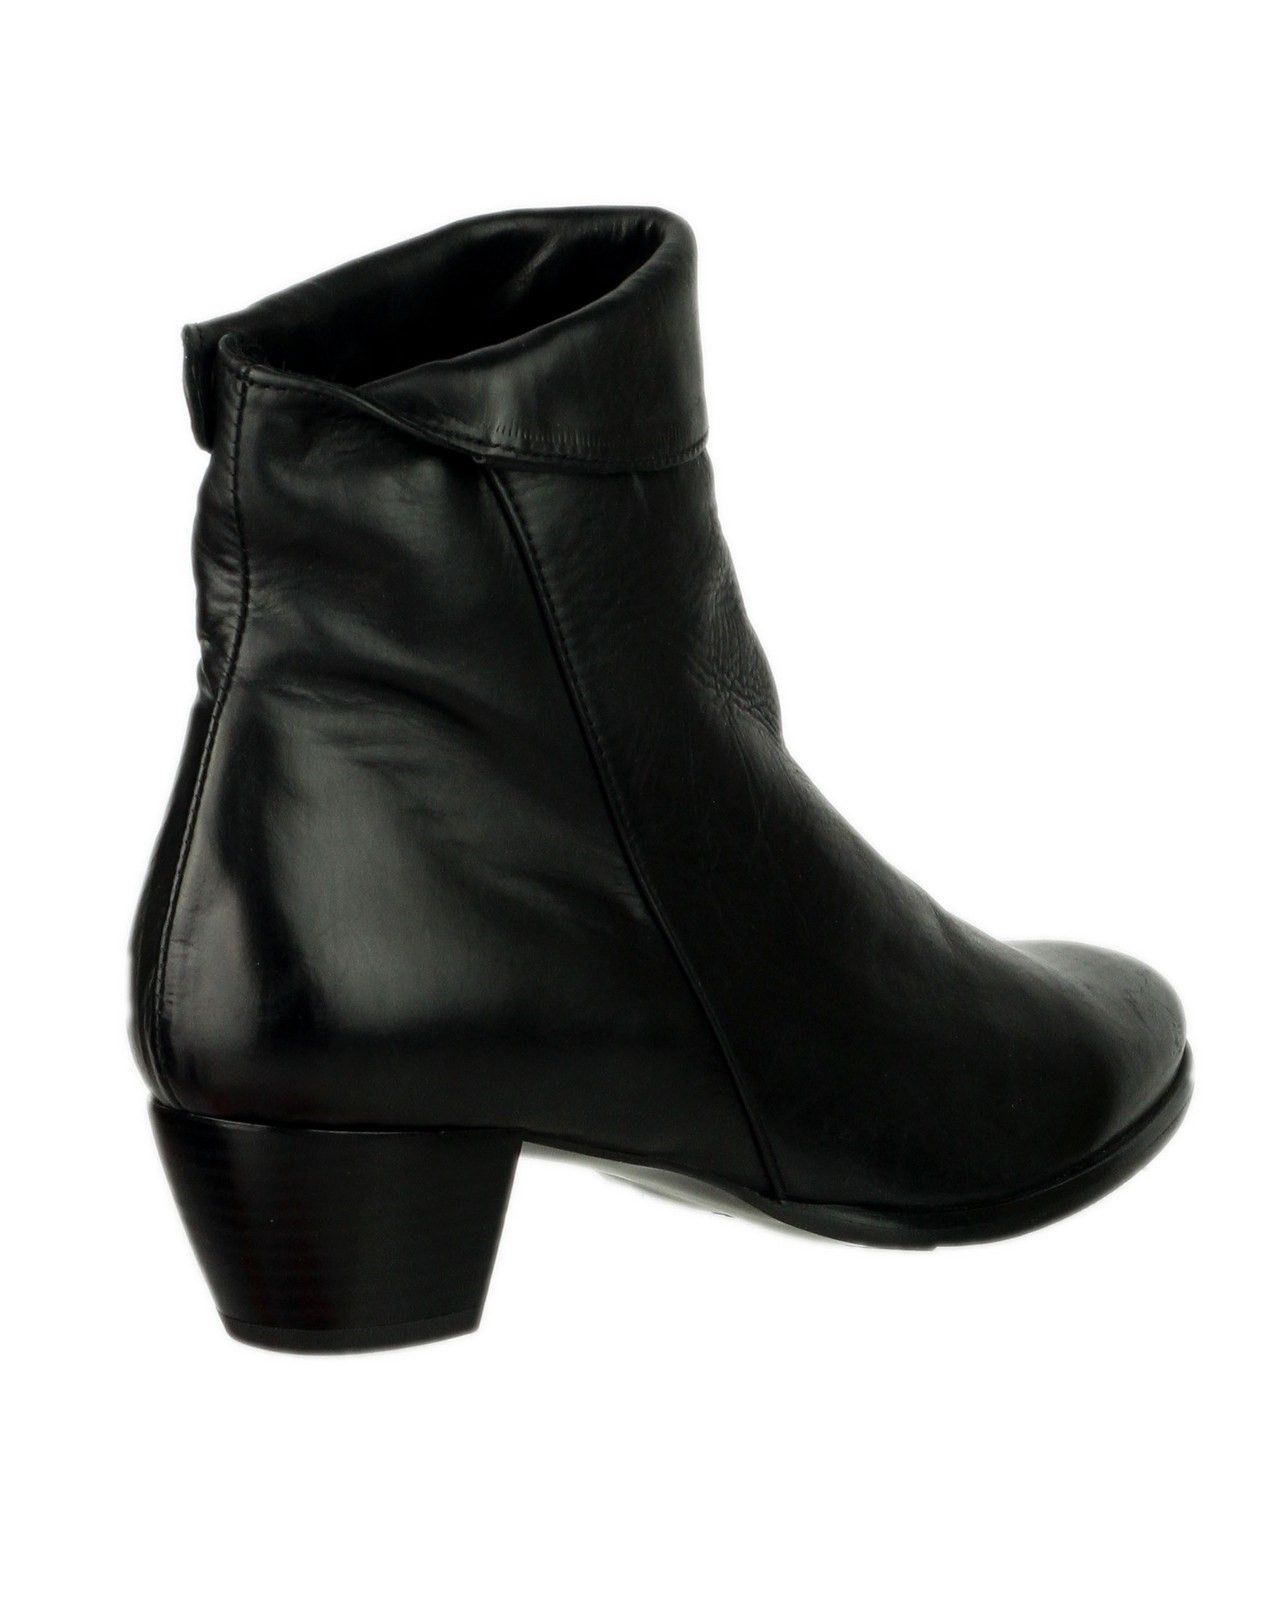 Riva brings classic Italian style with a twist with the Armadillo leather dress boot. A turn down cuff gives an asymmetric edge whilst a mid-height block heel oozes timeless elegance. Full inside zip for easy on and off. Riva Armadillo Leather Ladies Boots. 
Smooth leather upper with soft leather lining. 
Side zip fastening. 
Pull on loop at back. 
Medium block heel.